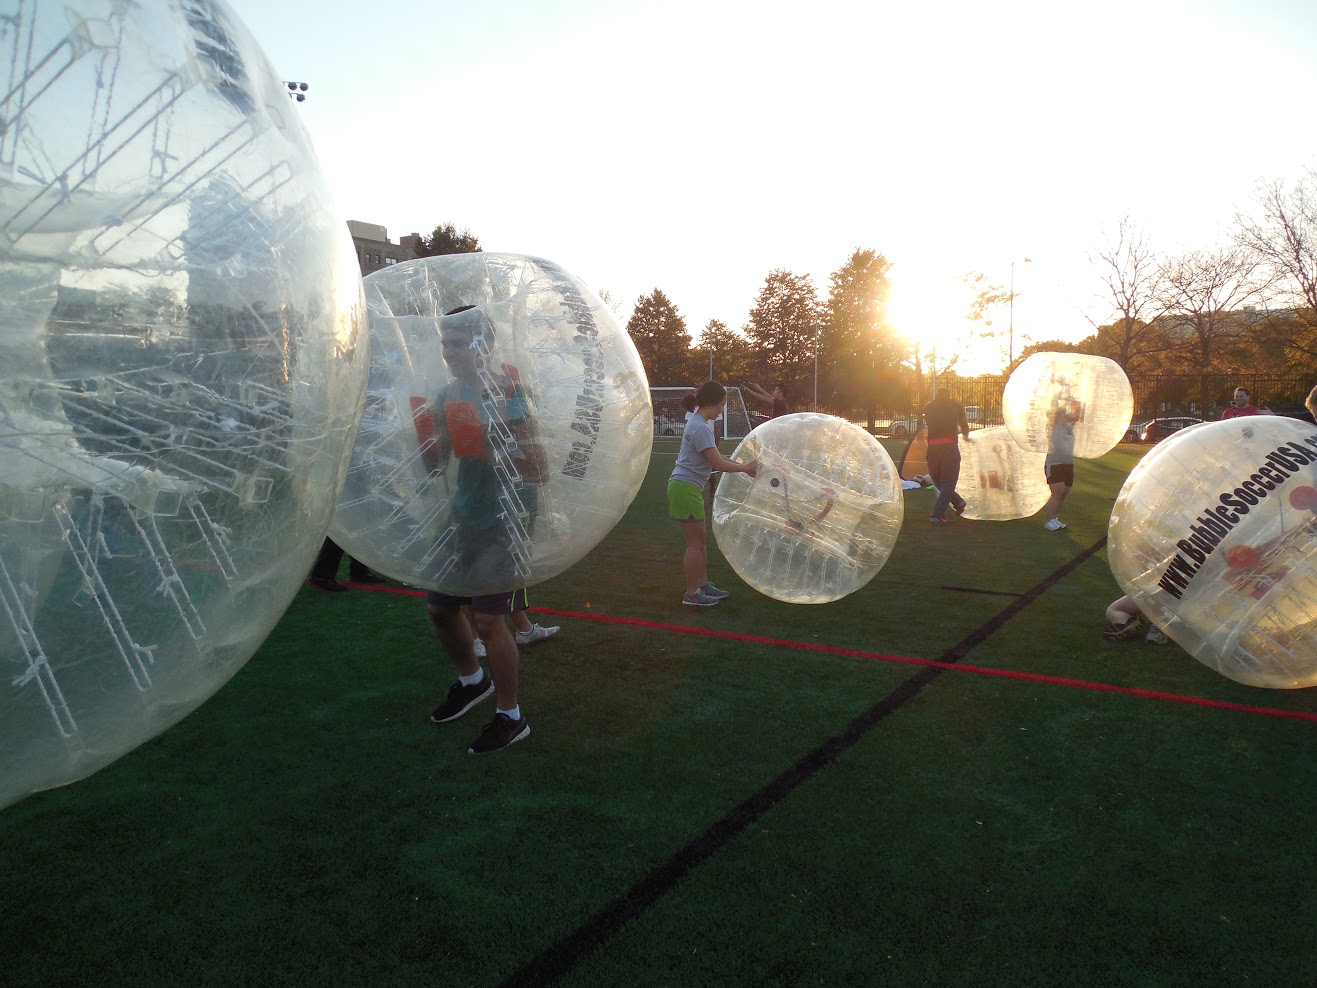 Bubble soccer players prepare to start a game. 